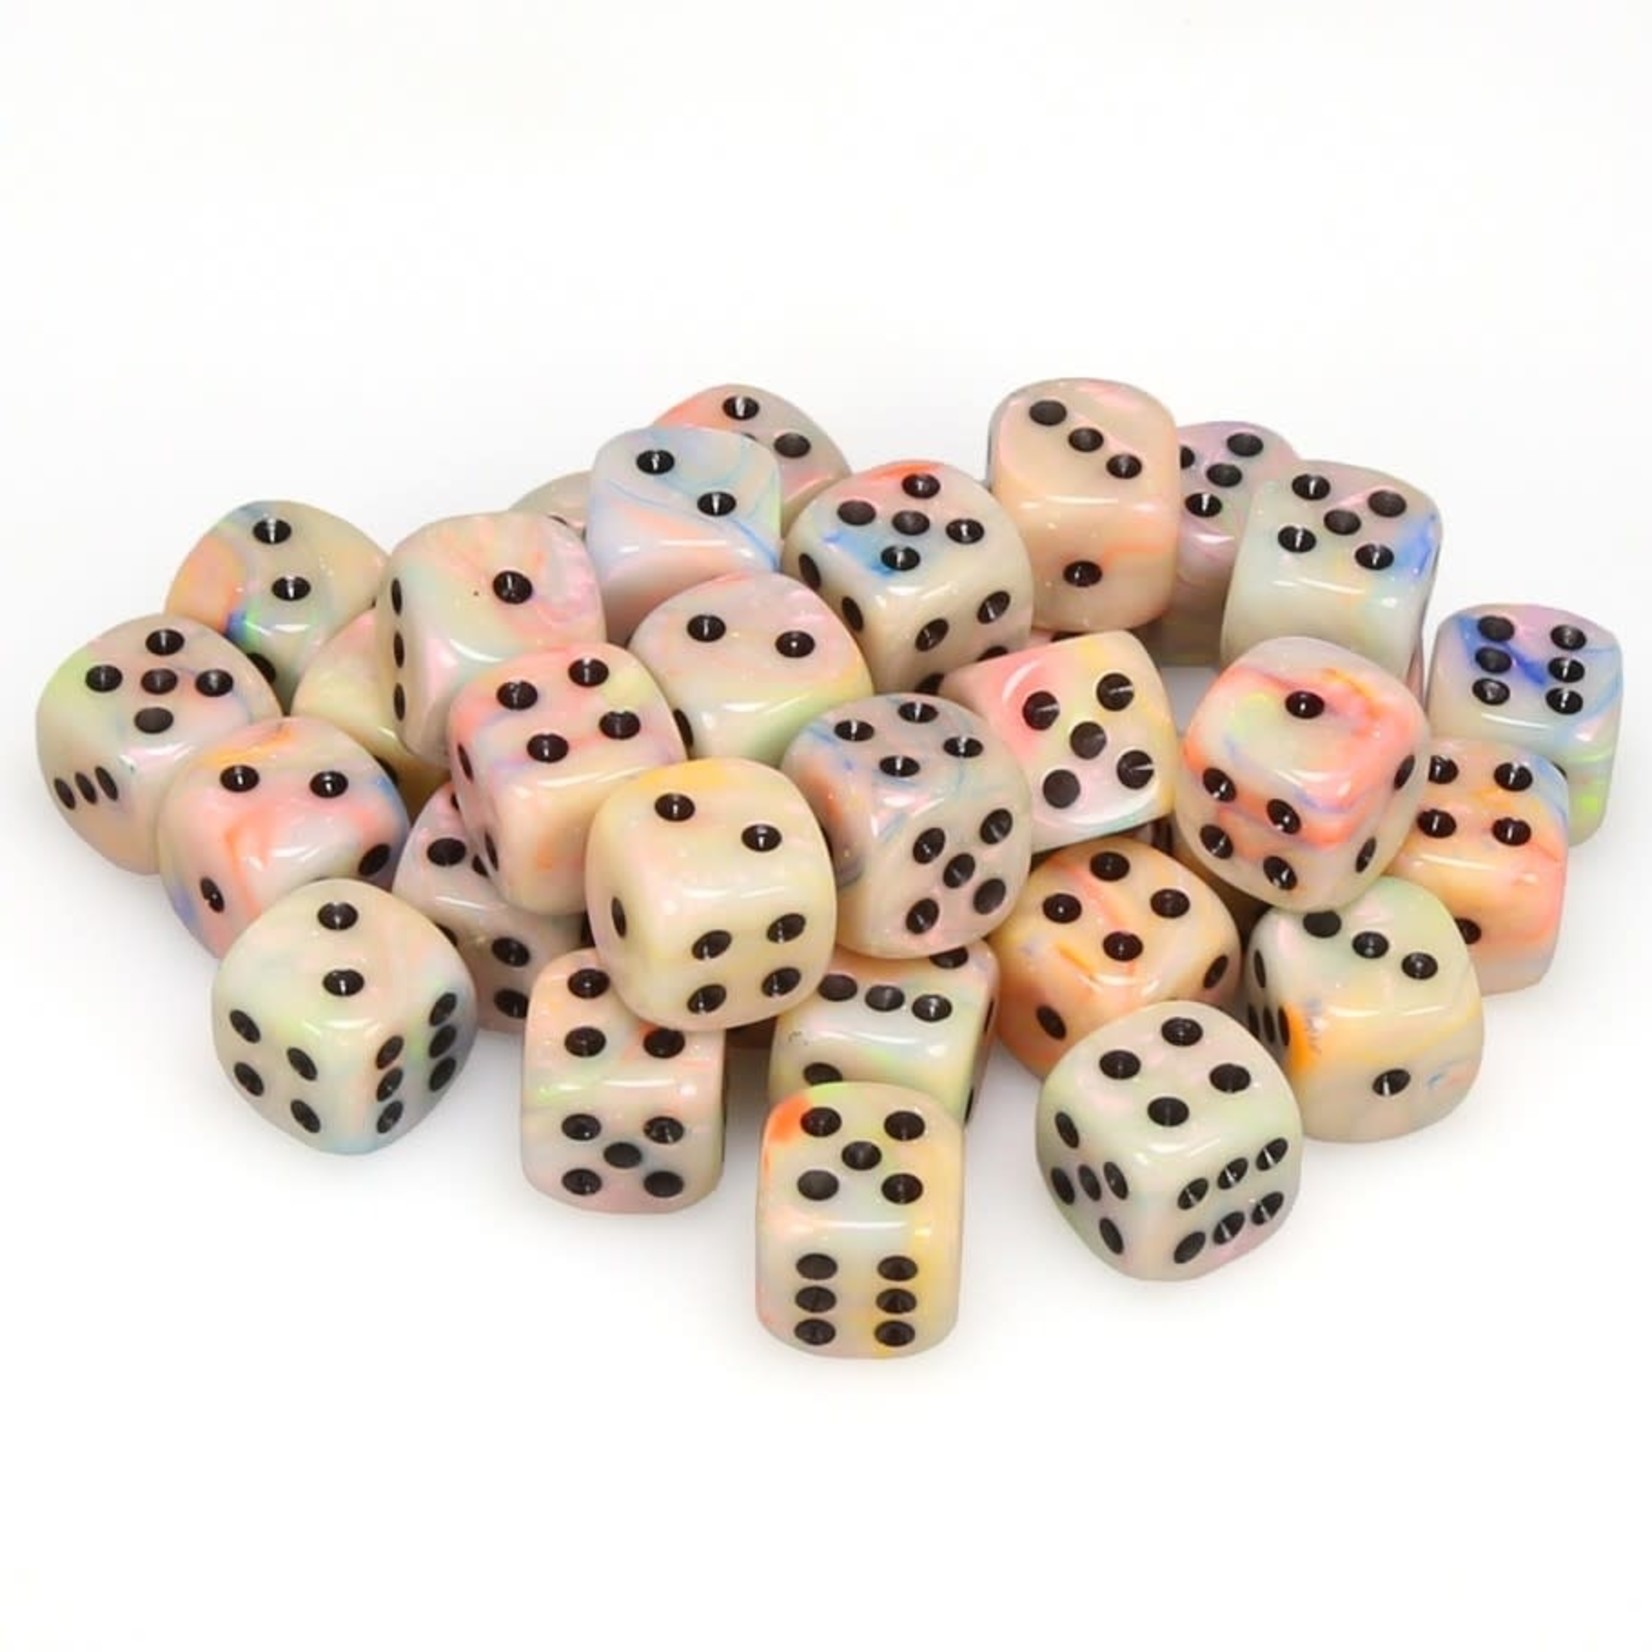 Chessex Chessex Festive Circus with Black 12 mm d6 36 die set